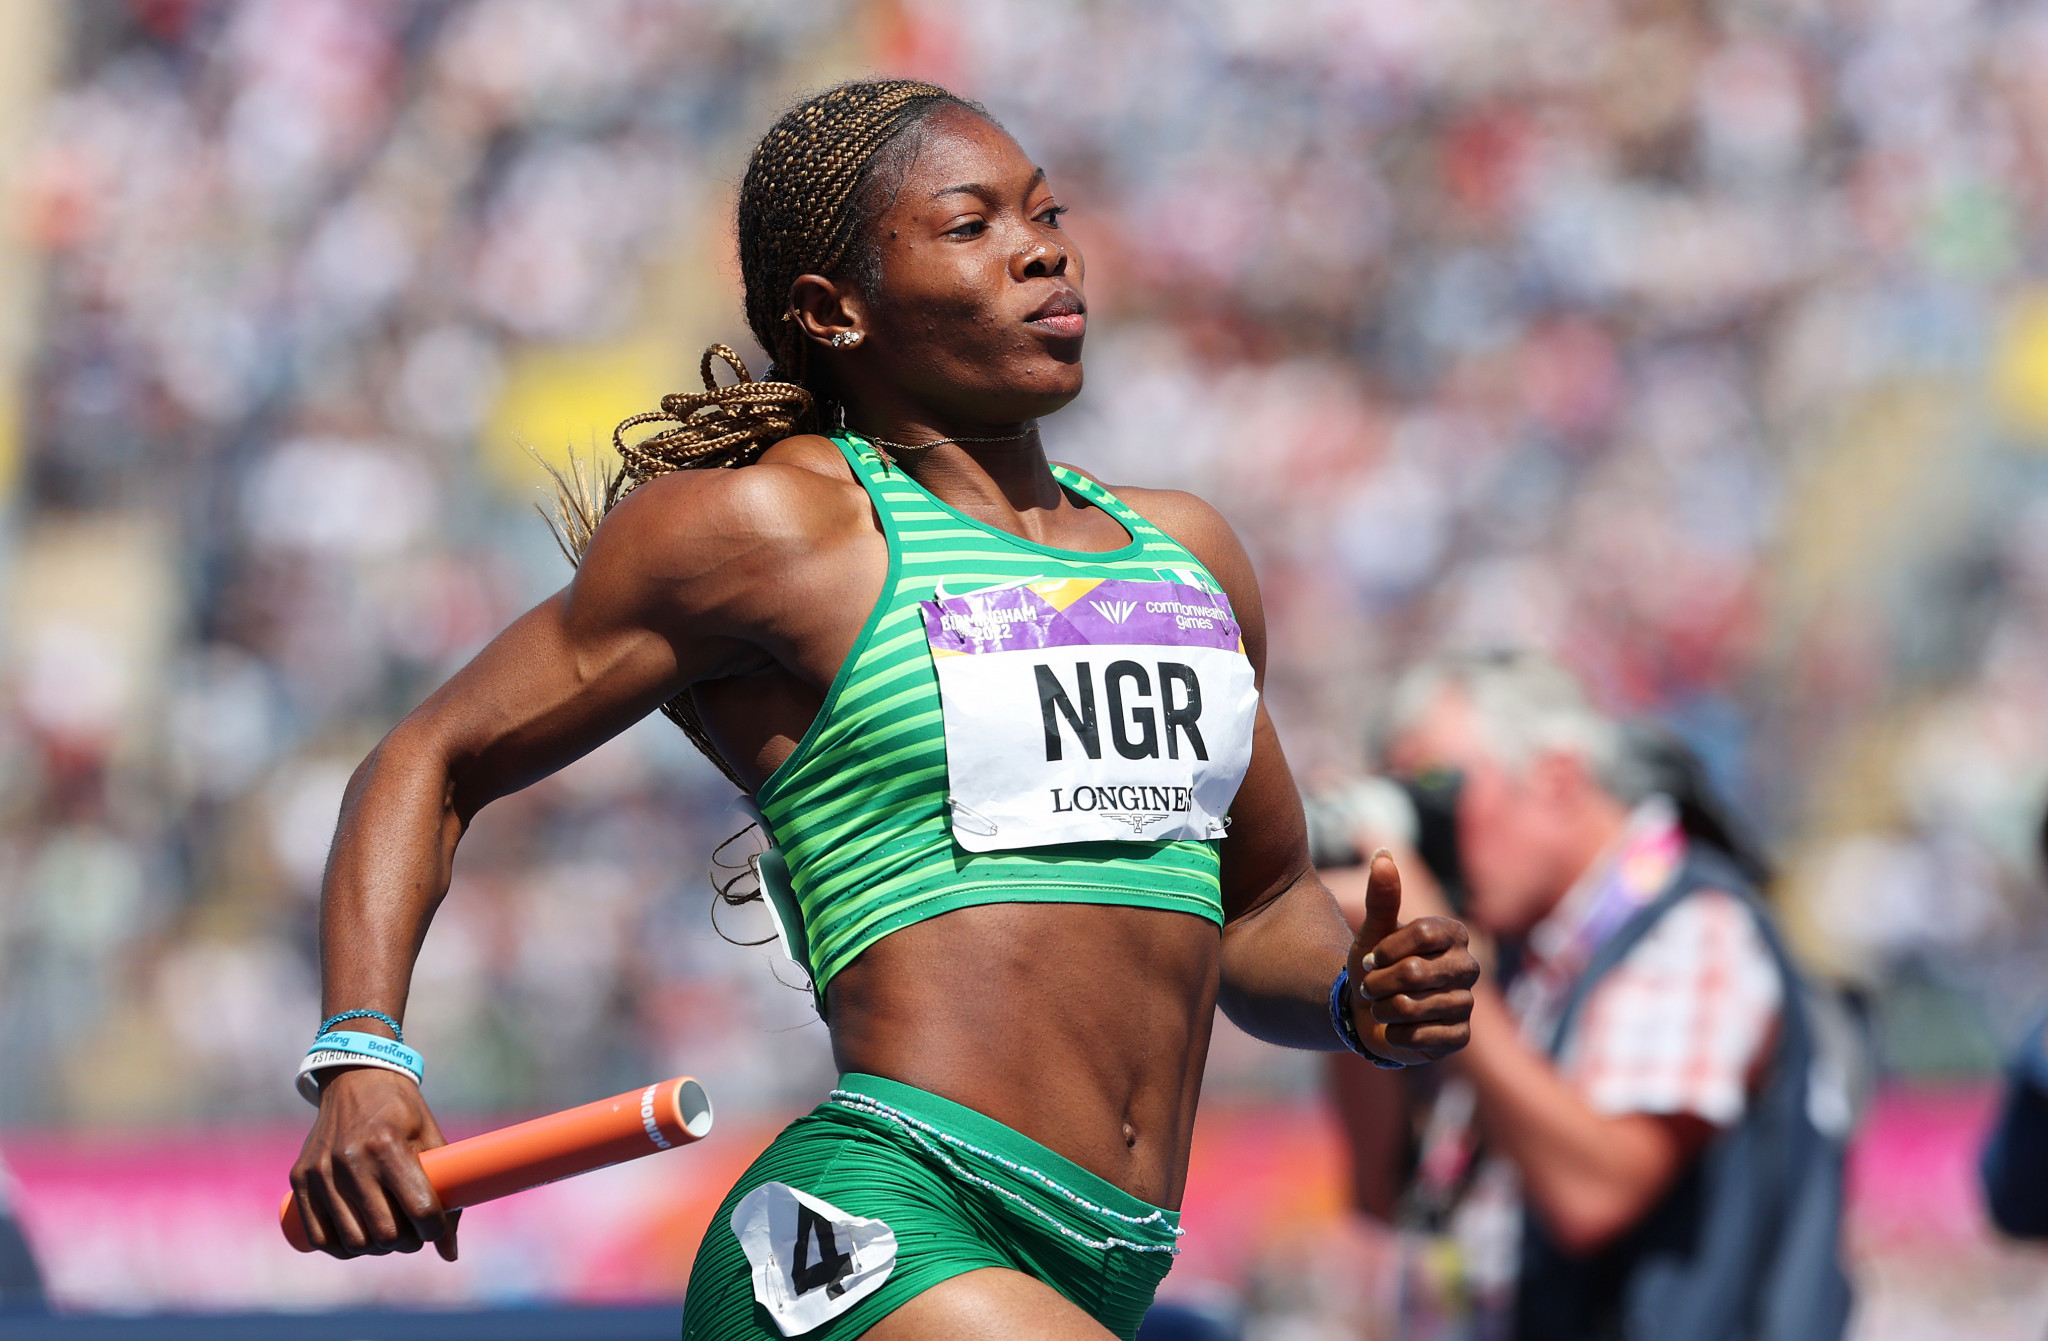 Commonwealth Games relay champion Nwokocha given provisional doping ban